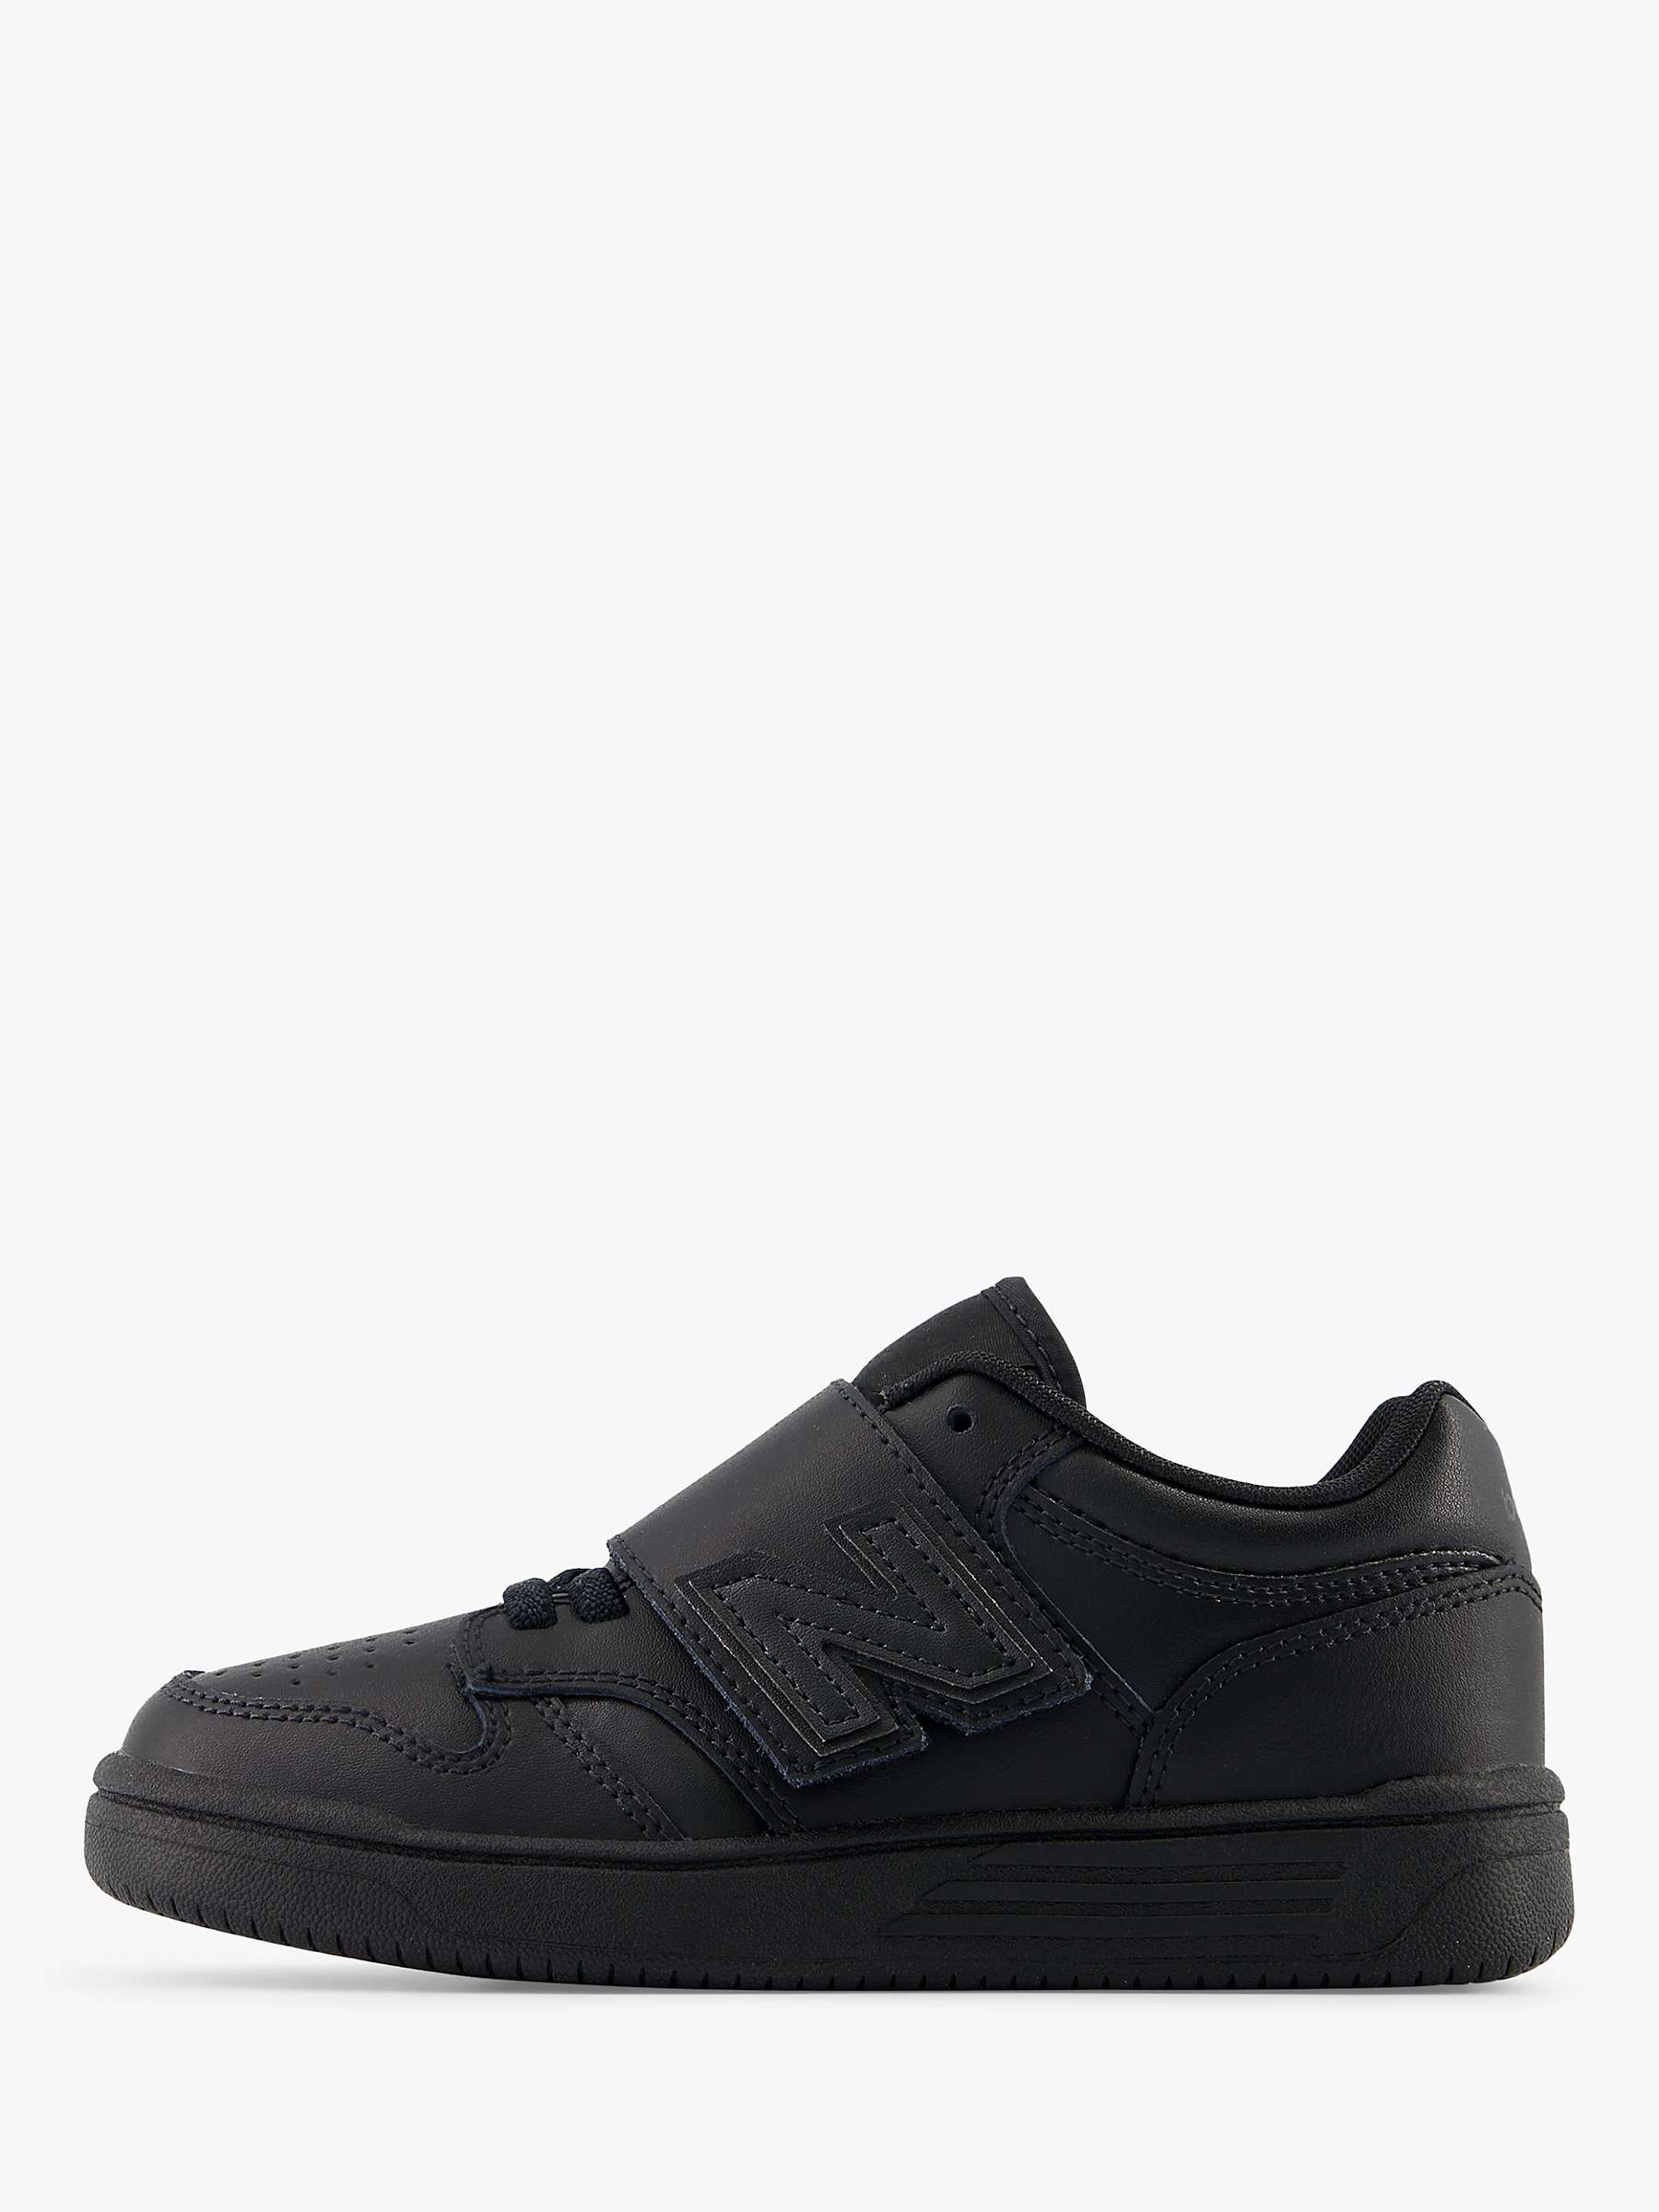 Buy New Balance Kids' 480 Bungee Lace Trainers Online at johnlewis.com